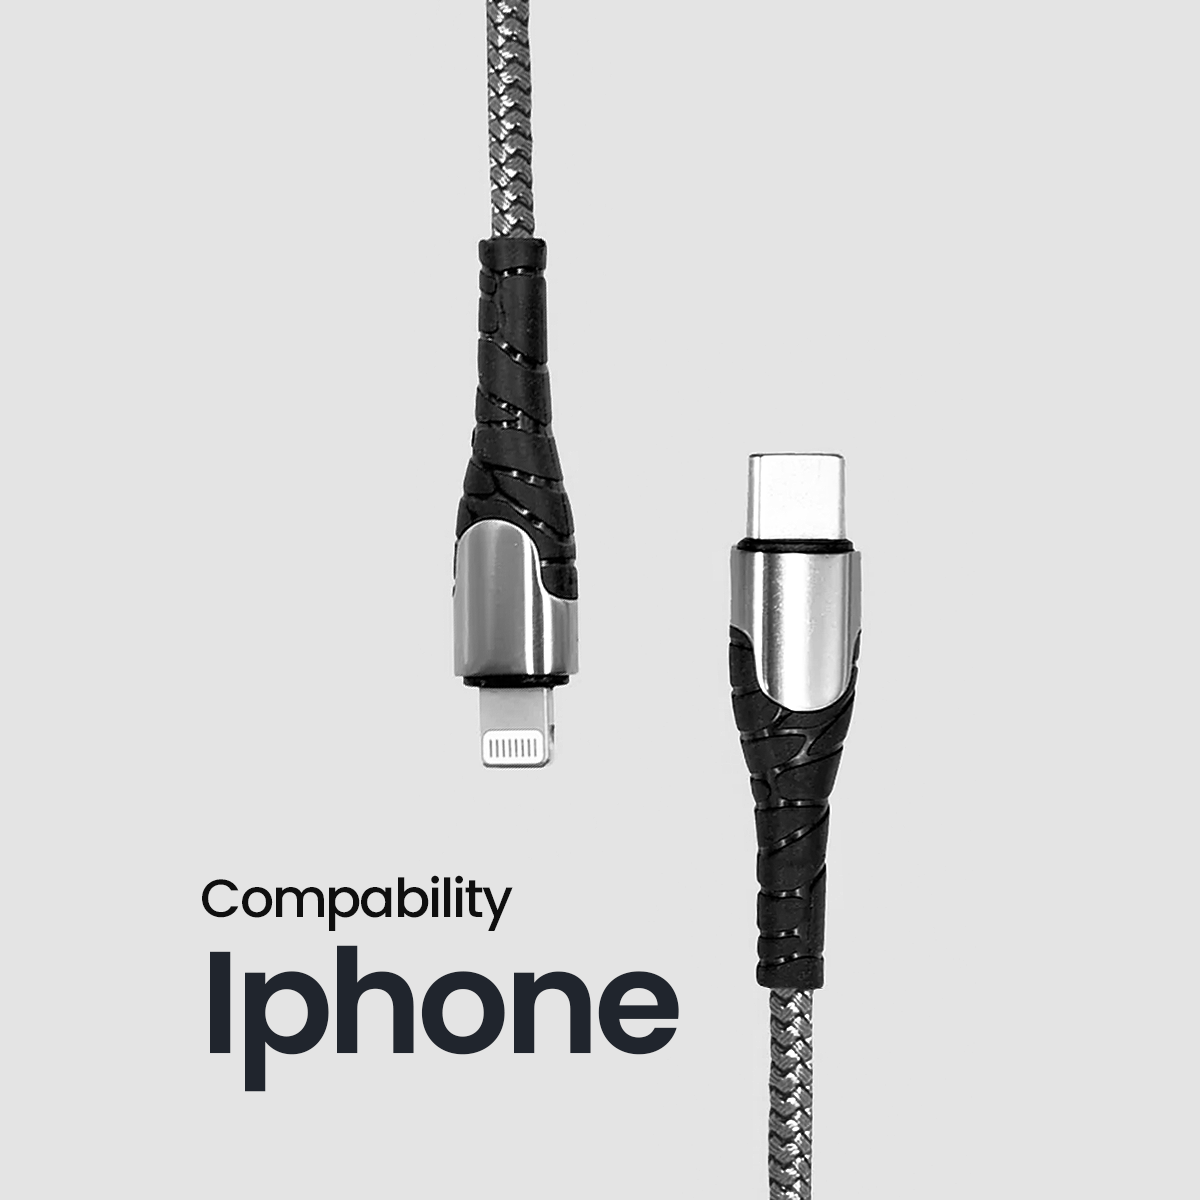 NYLTC - AN APPLE CHARGING CABLE